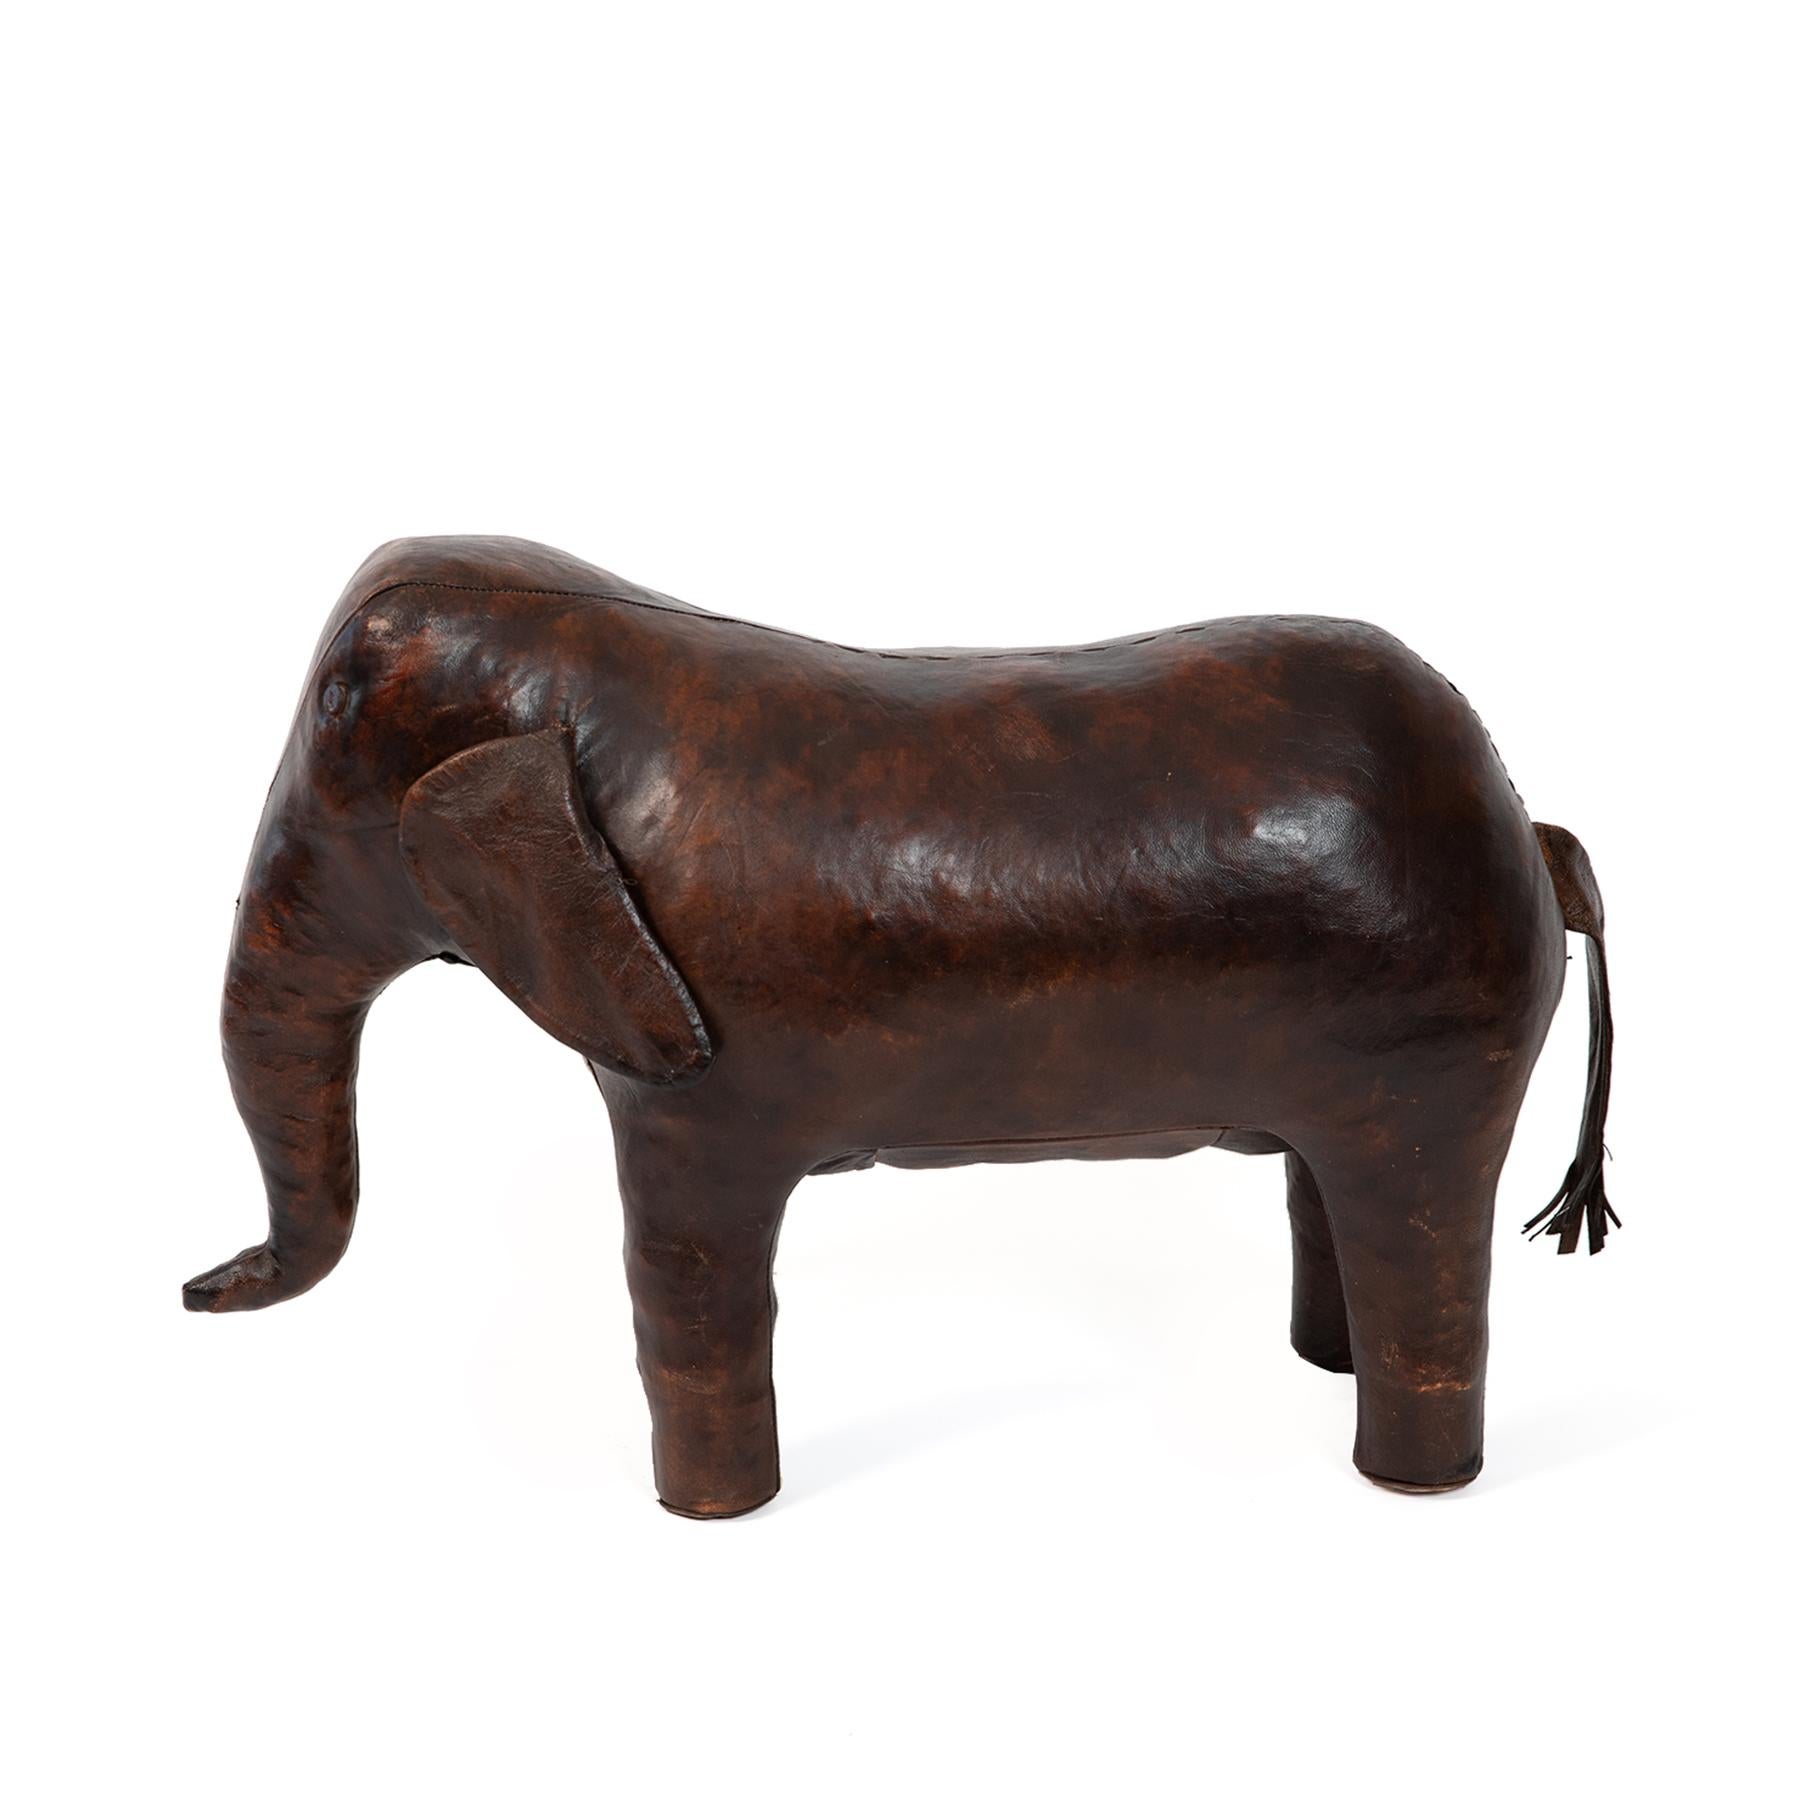 Omersa large-scale leather elephant, circa early 1960s. This all original example has beautifully patinated leather and age appropriate wear.